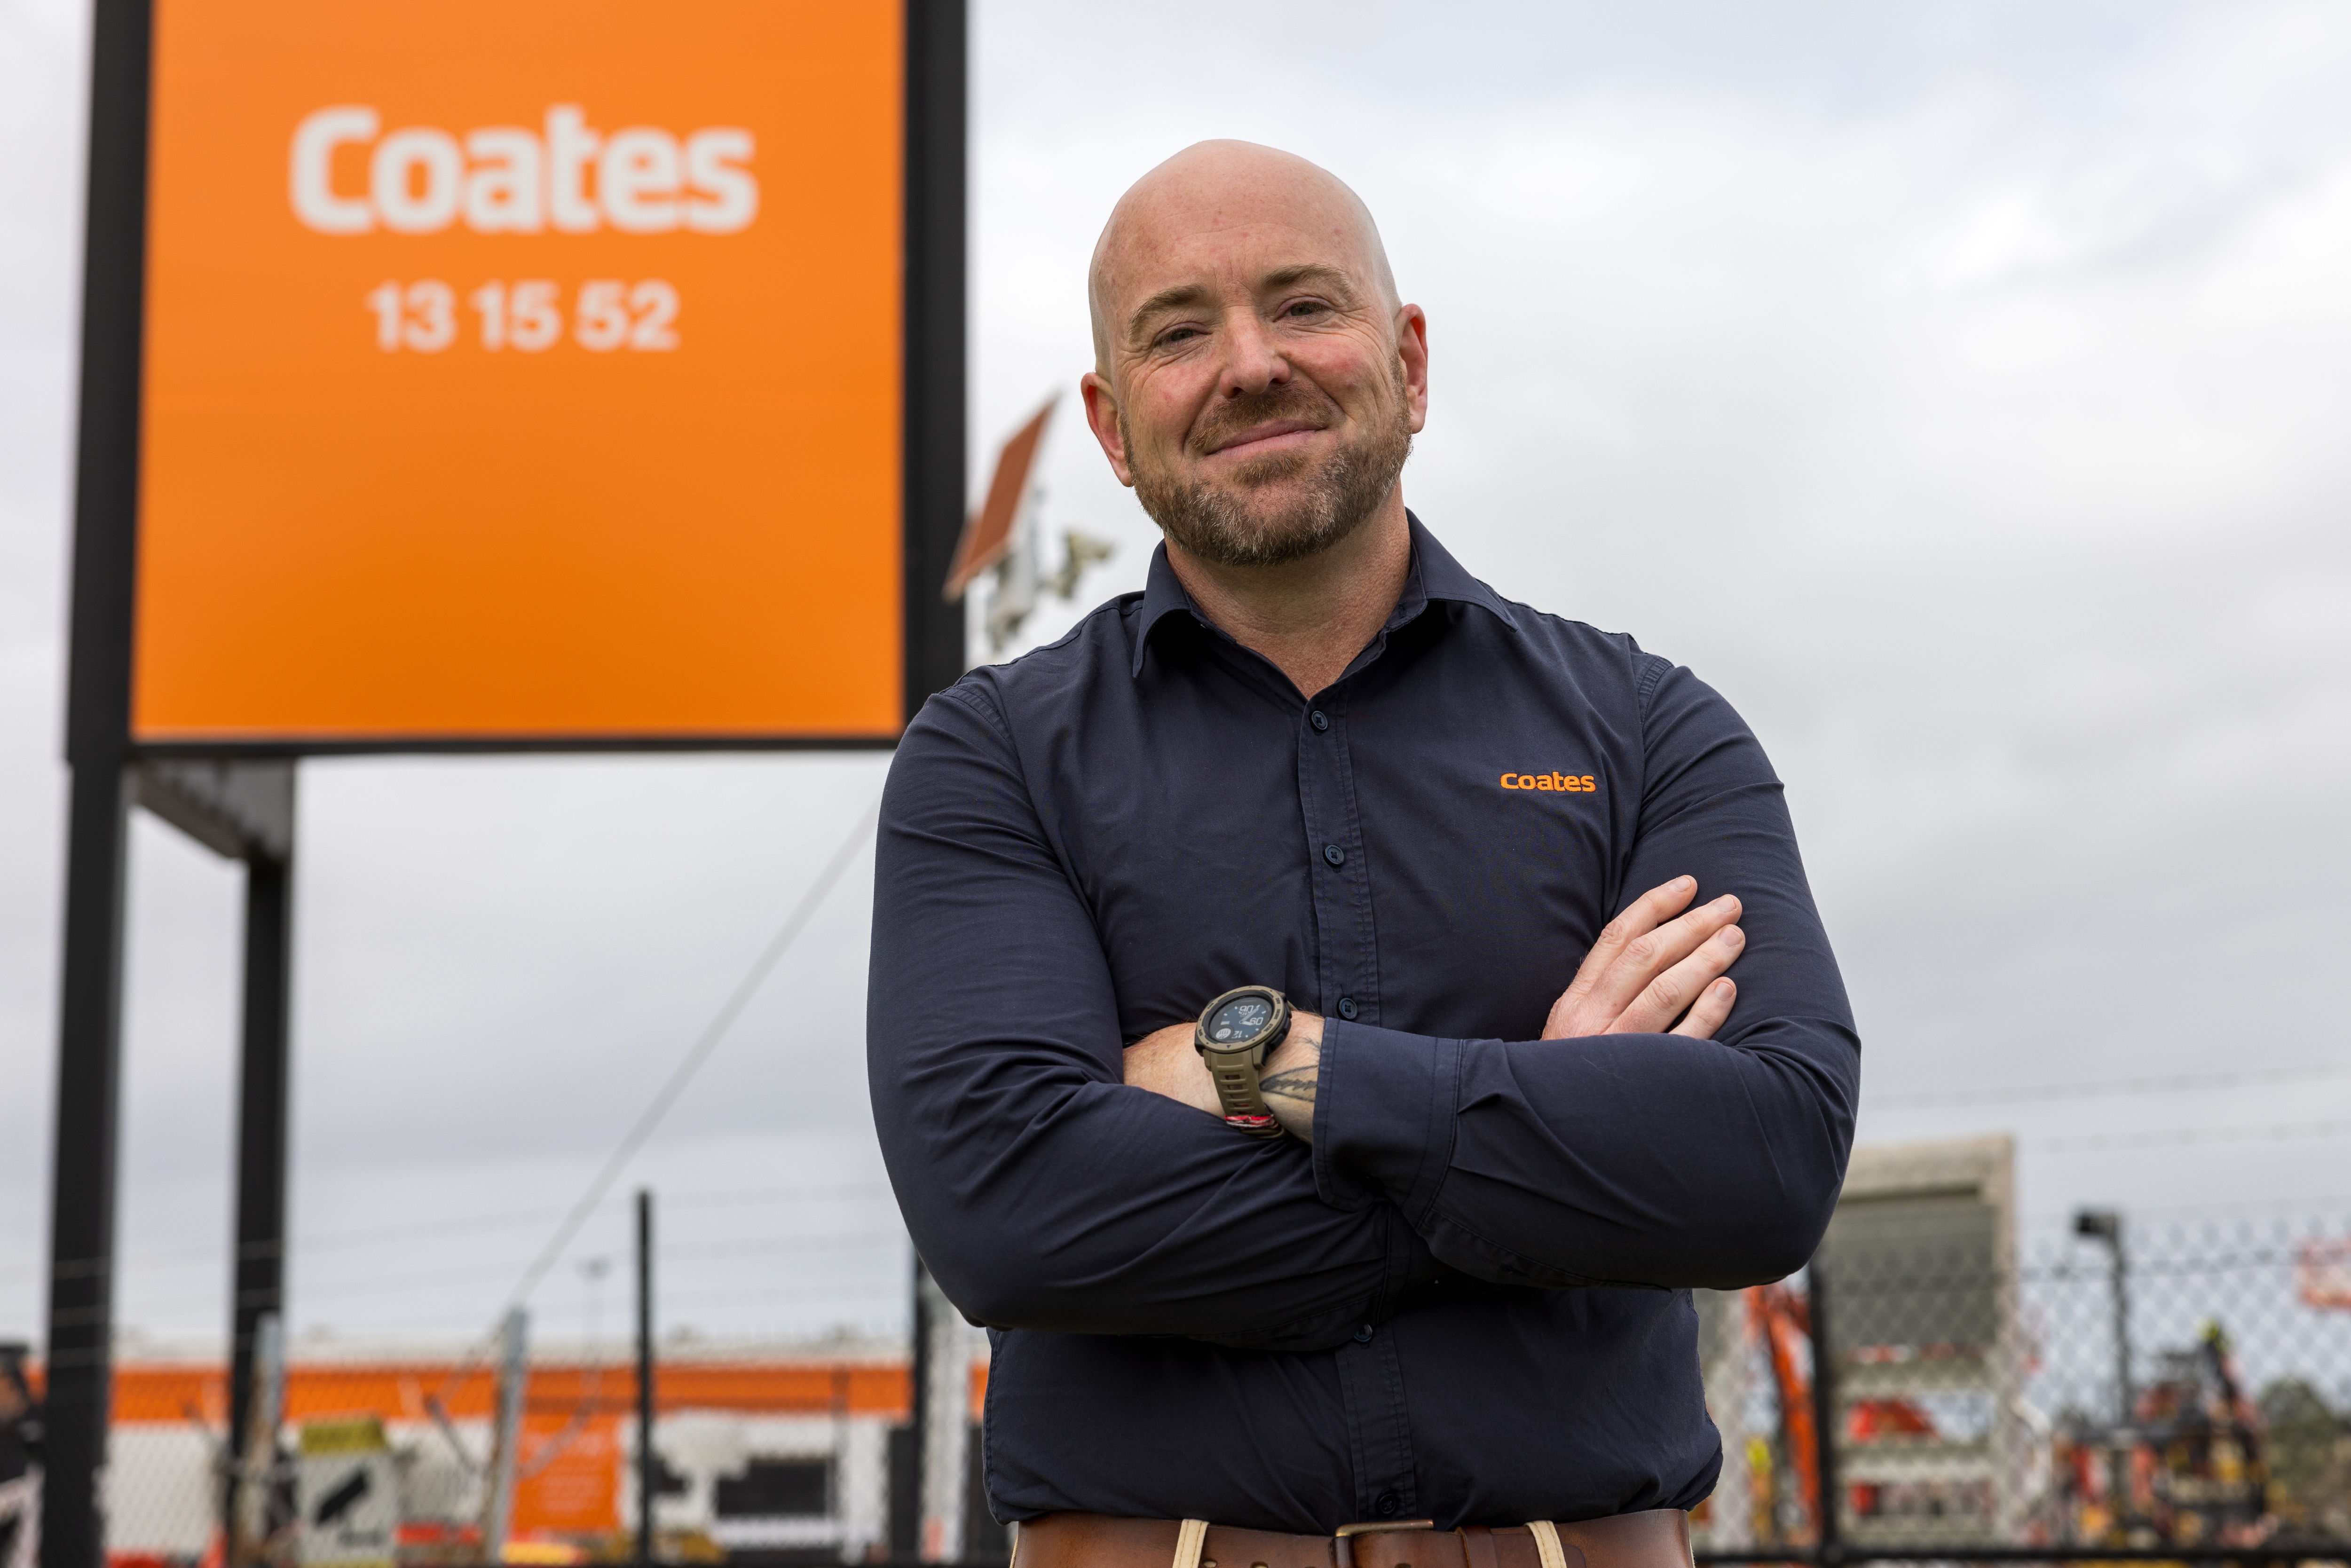 Group Manager of Products at Coates, Dan Goodfellow